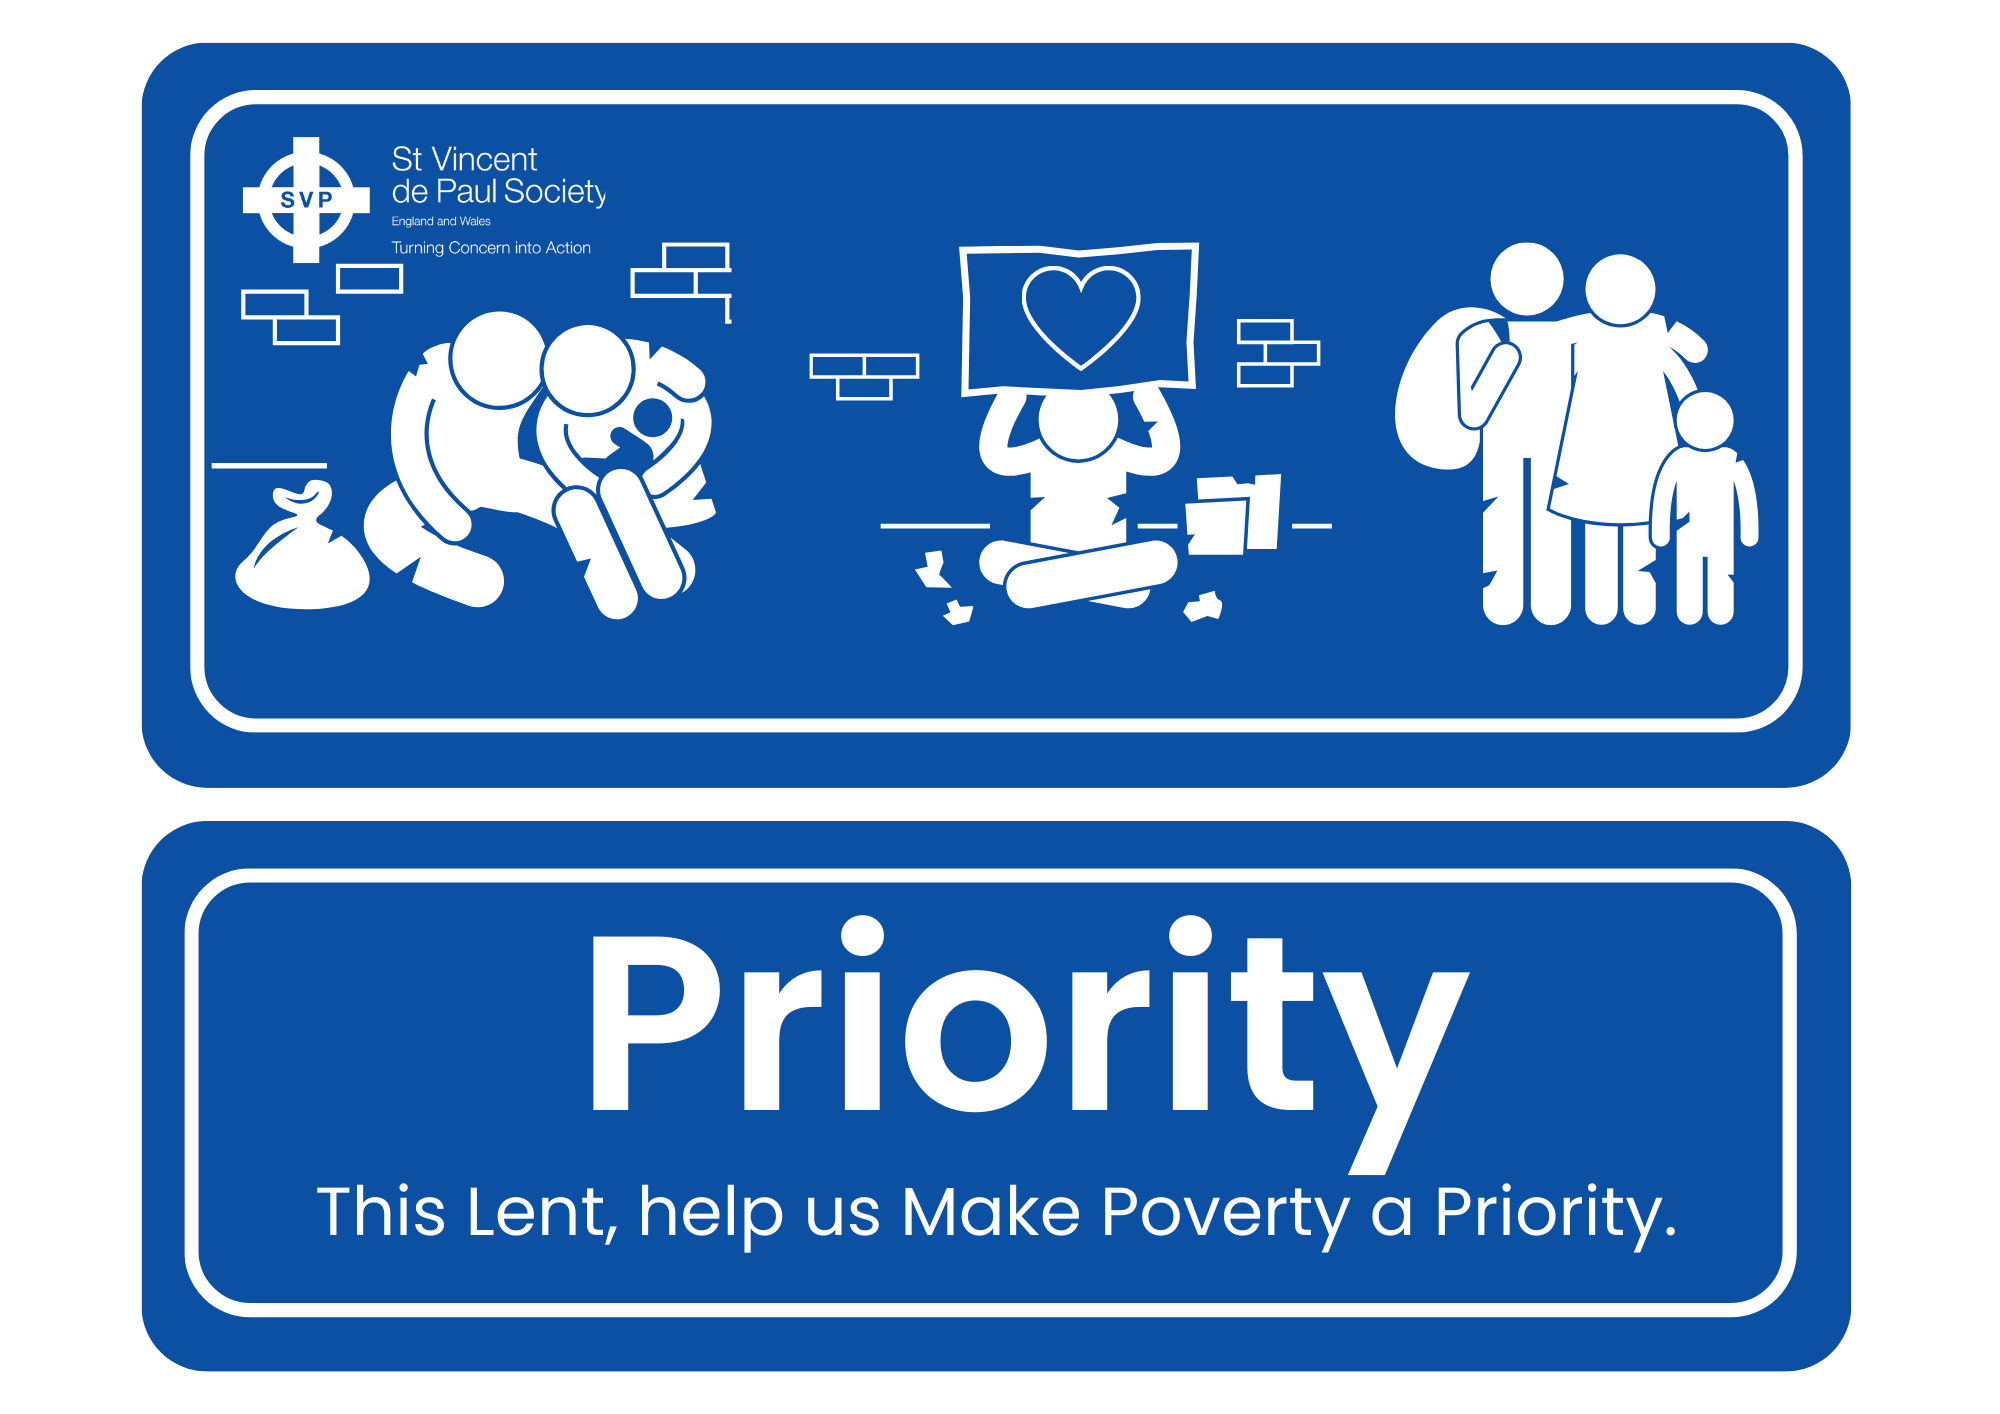 This is an image of the Make Poverty a Priority logo